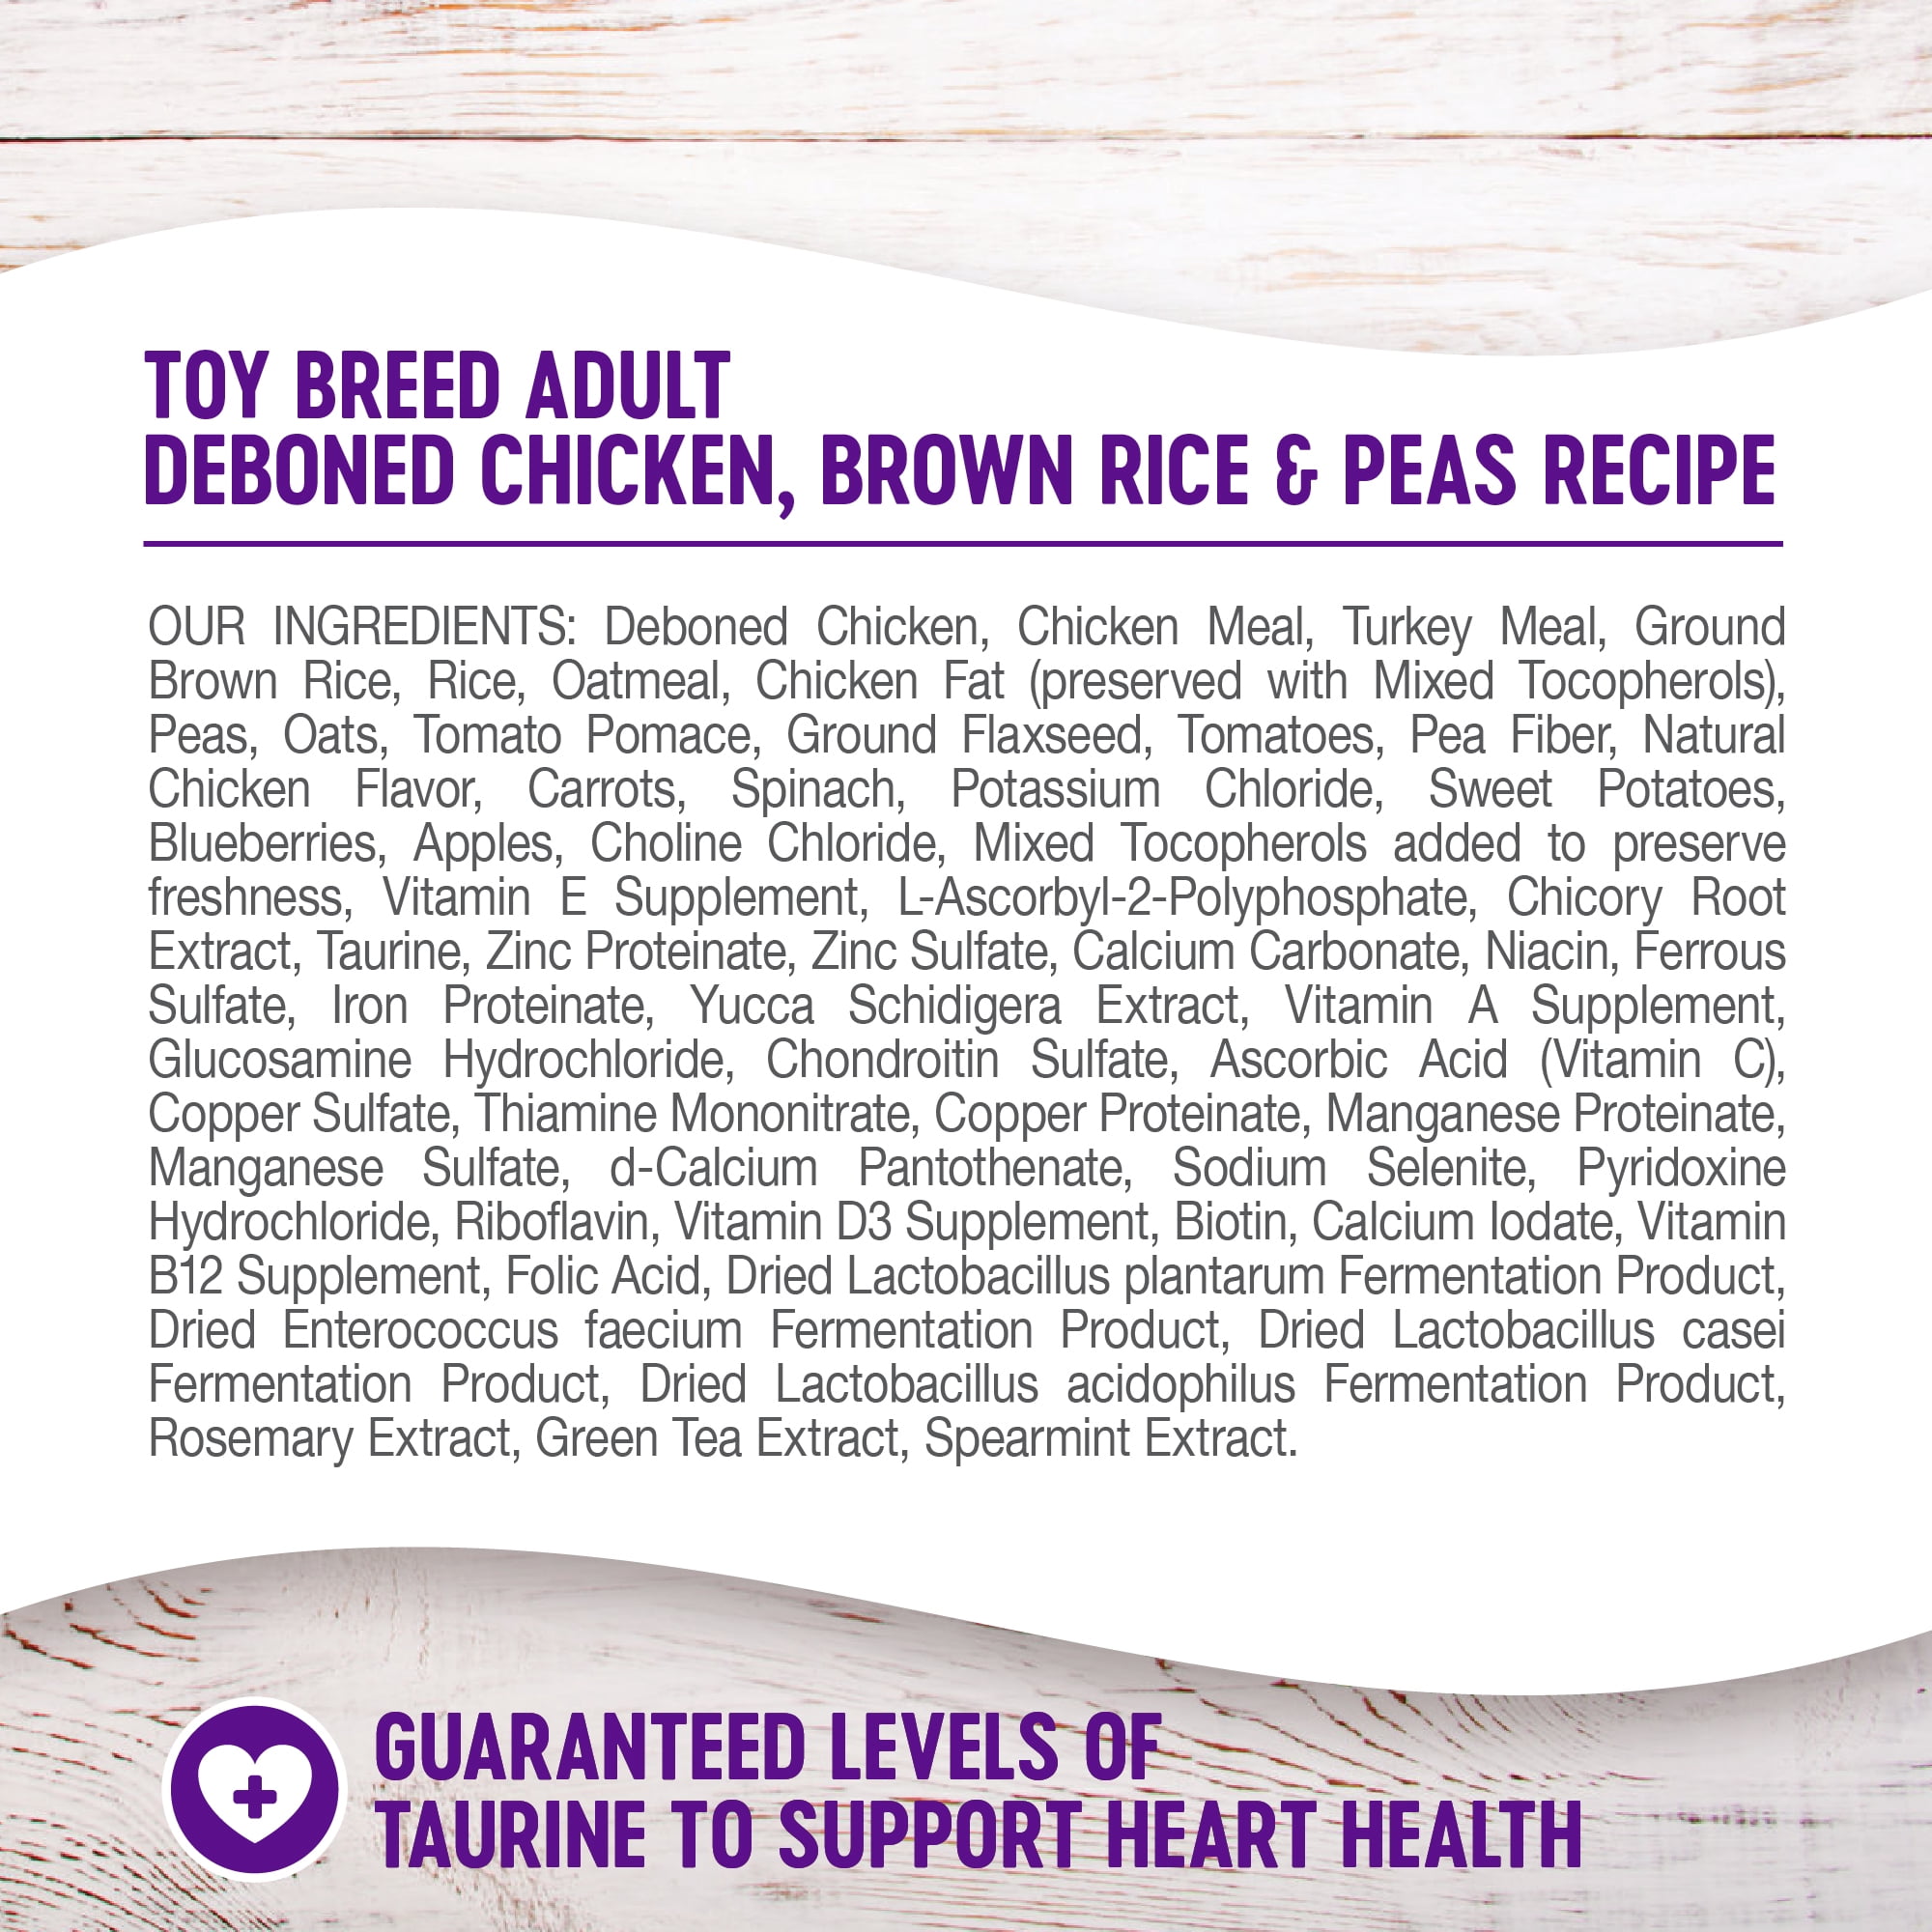 Complete Health Toy Breed Dog Food